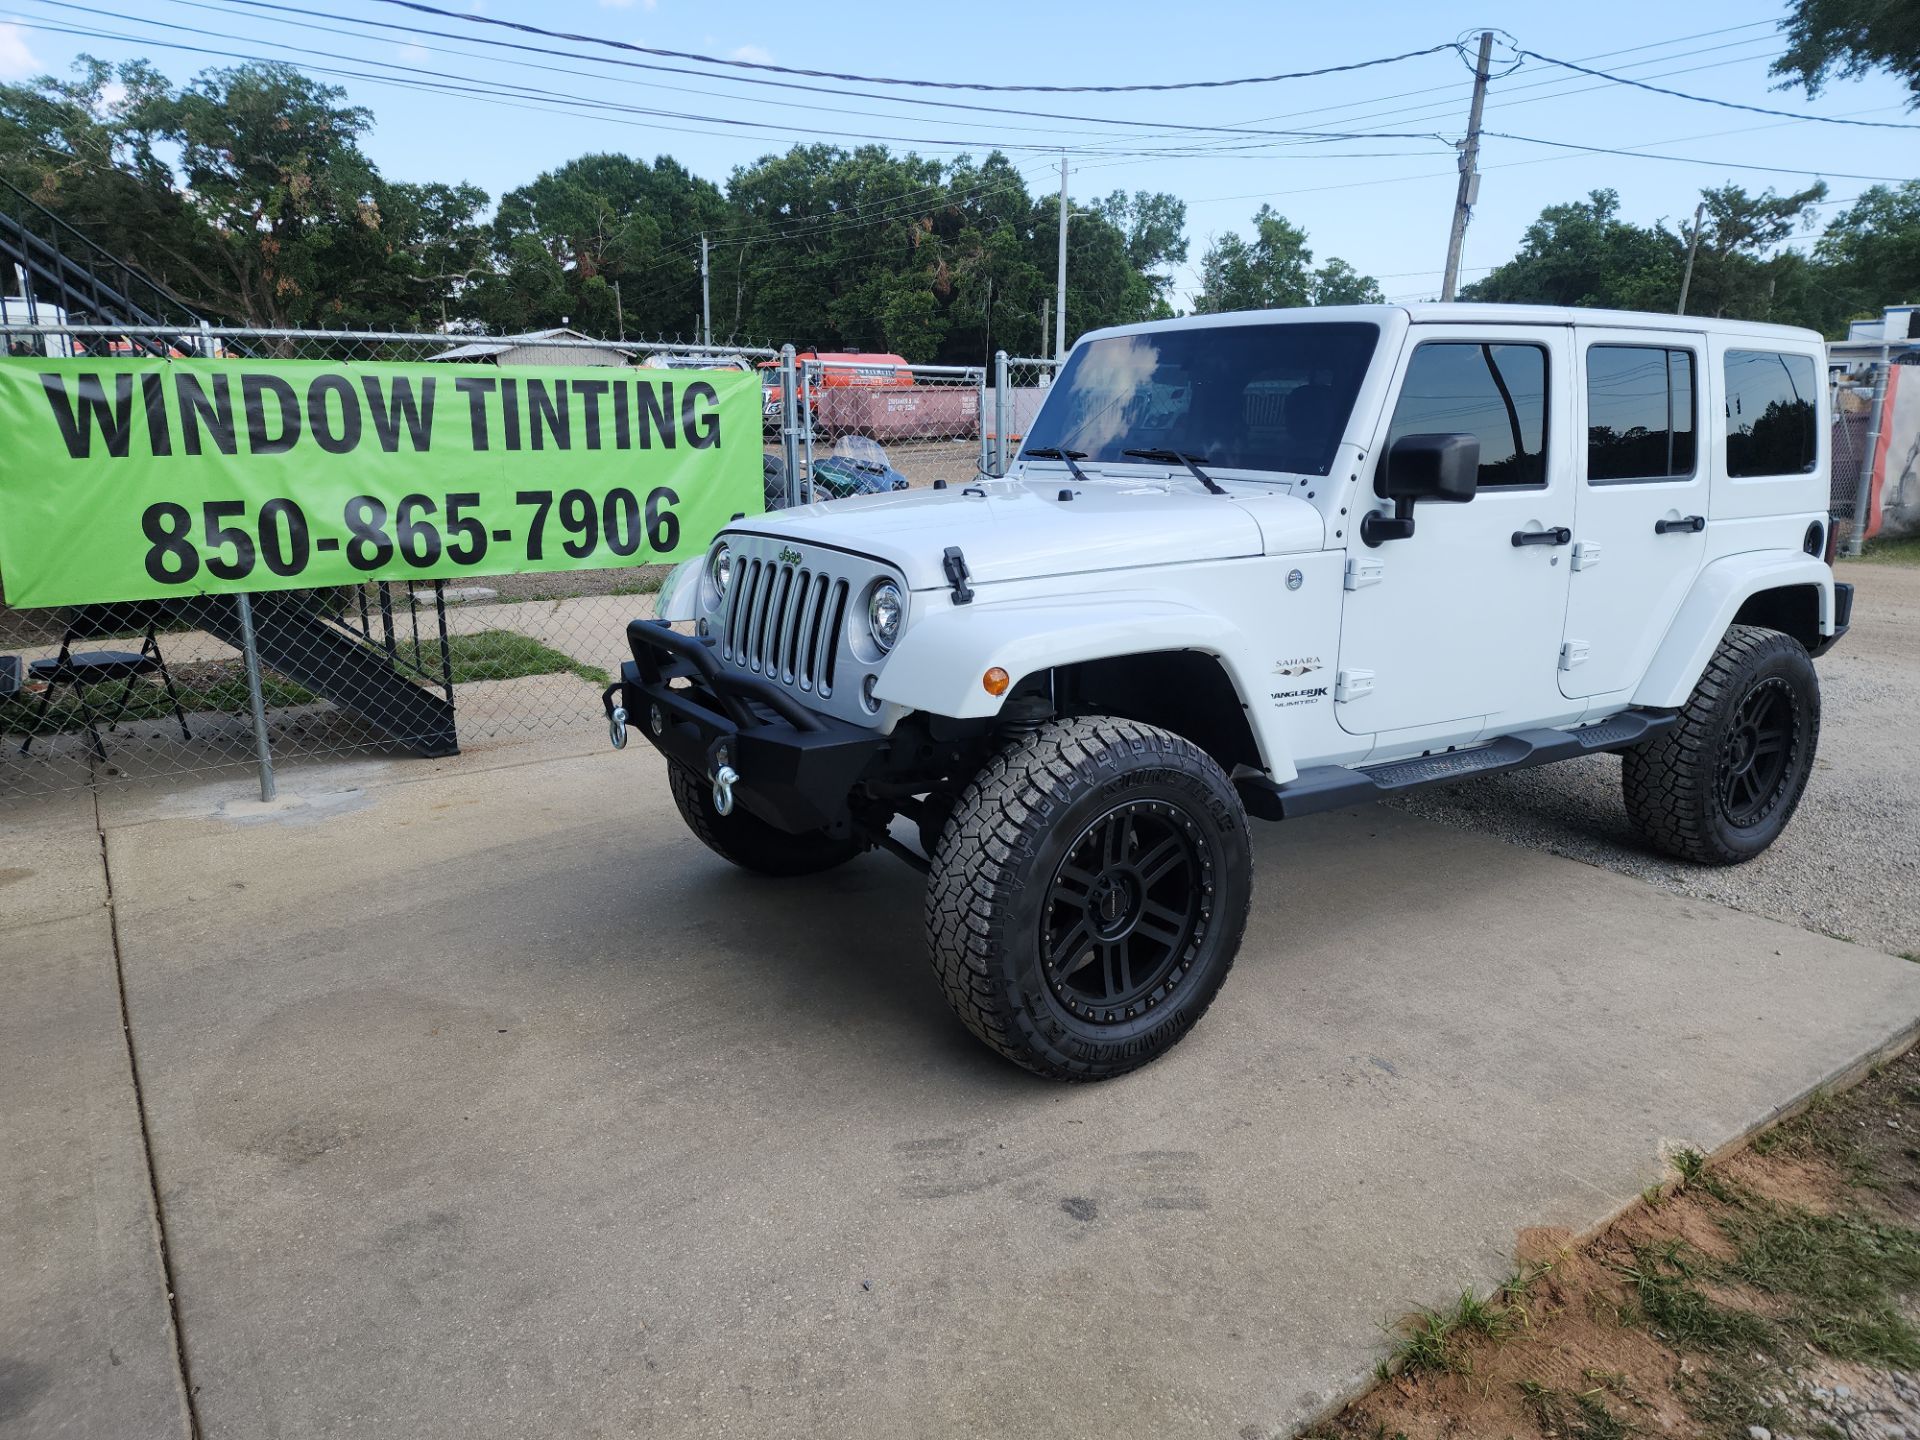 in the photo there is a white jeep wrangler parked in front of a banner advertising window tinting services by t's window tinting the jeep features aftermarket wheels which suggest it may be customized in other ways as well including a potential new window tint job window tinting involves applying a thin laminate film to the interior or exterior of the glass surfaces on a vehicle significantly the windows to reduce the amount of ultraviolet uv and infrared light that passes through the glass this process can protect the vehicle interior from sun damage provide some shatter resistance and increase privacy for passengers as well as enhance the aesthetics of the vehicle